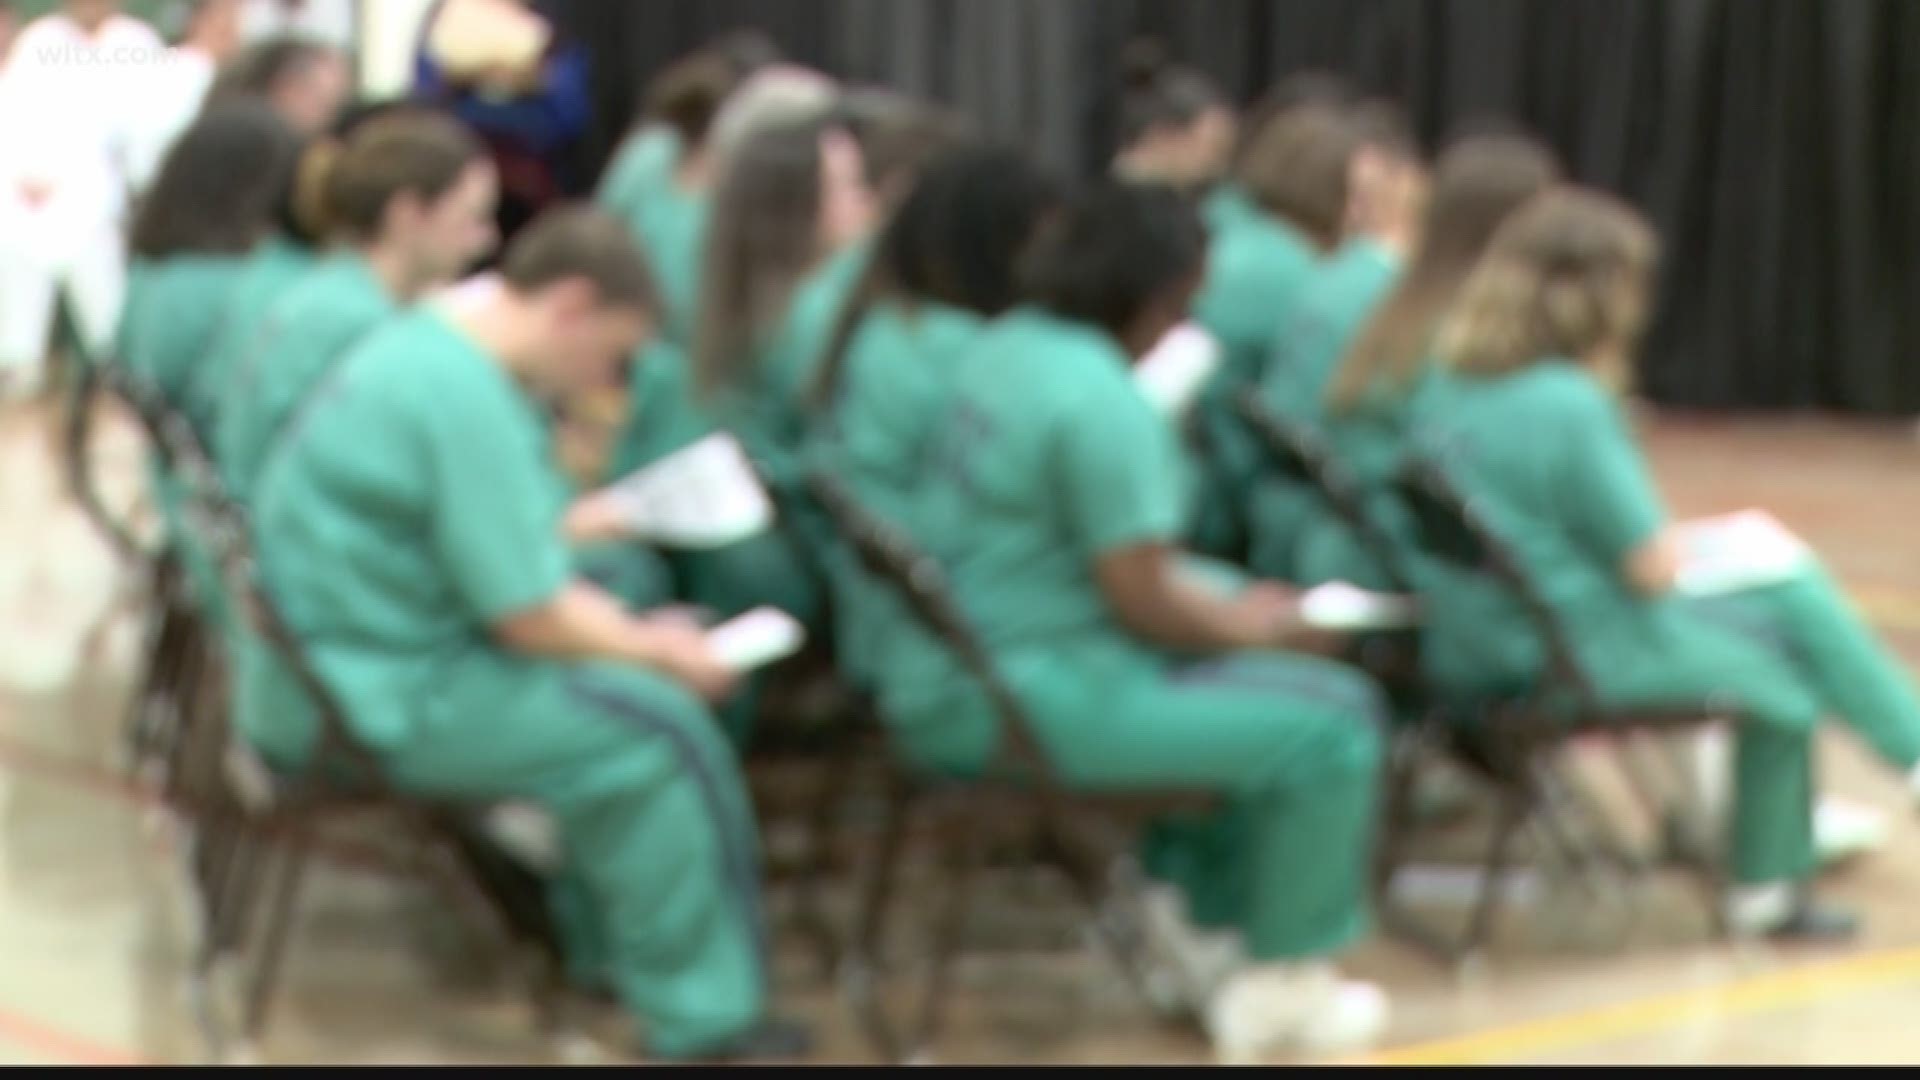 25 inmates in South Carolina prisons are now certified to help others with substance abuse. A graduation ceremony recognized the woman for becoming certified peer support specialists.